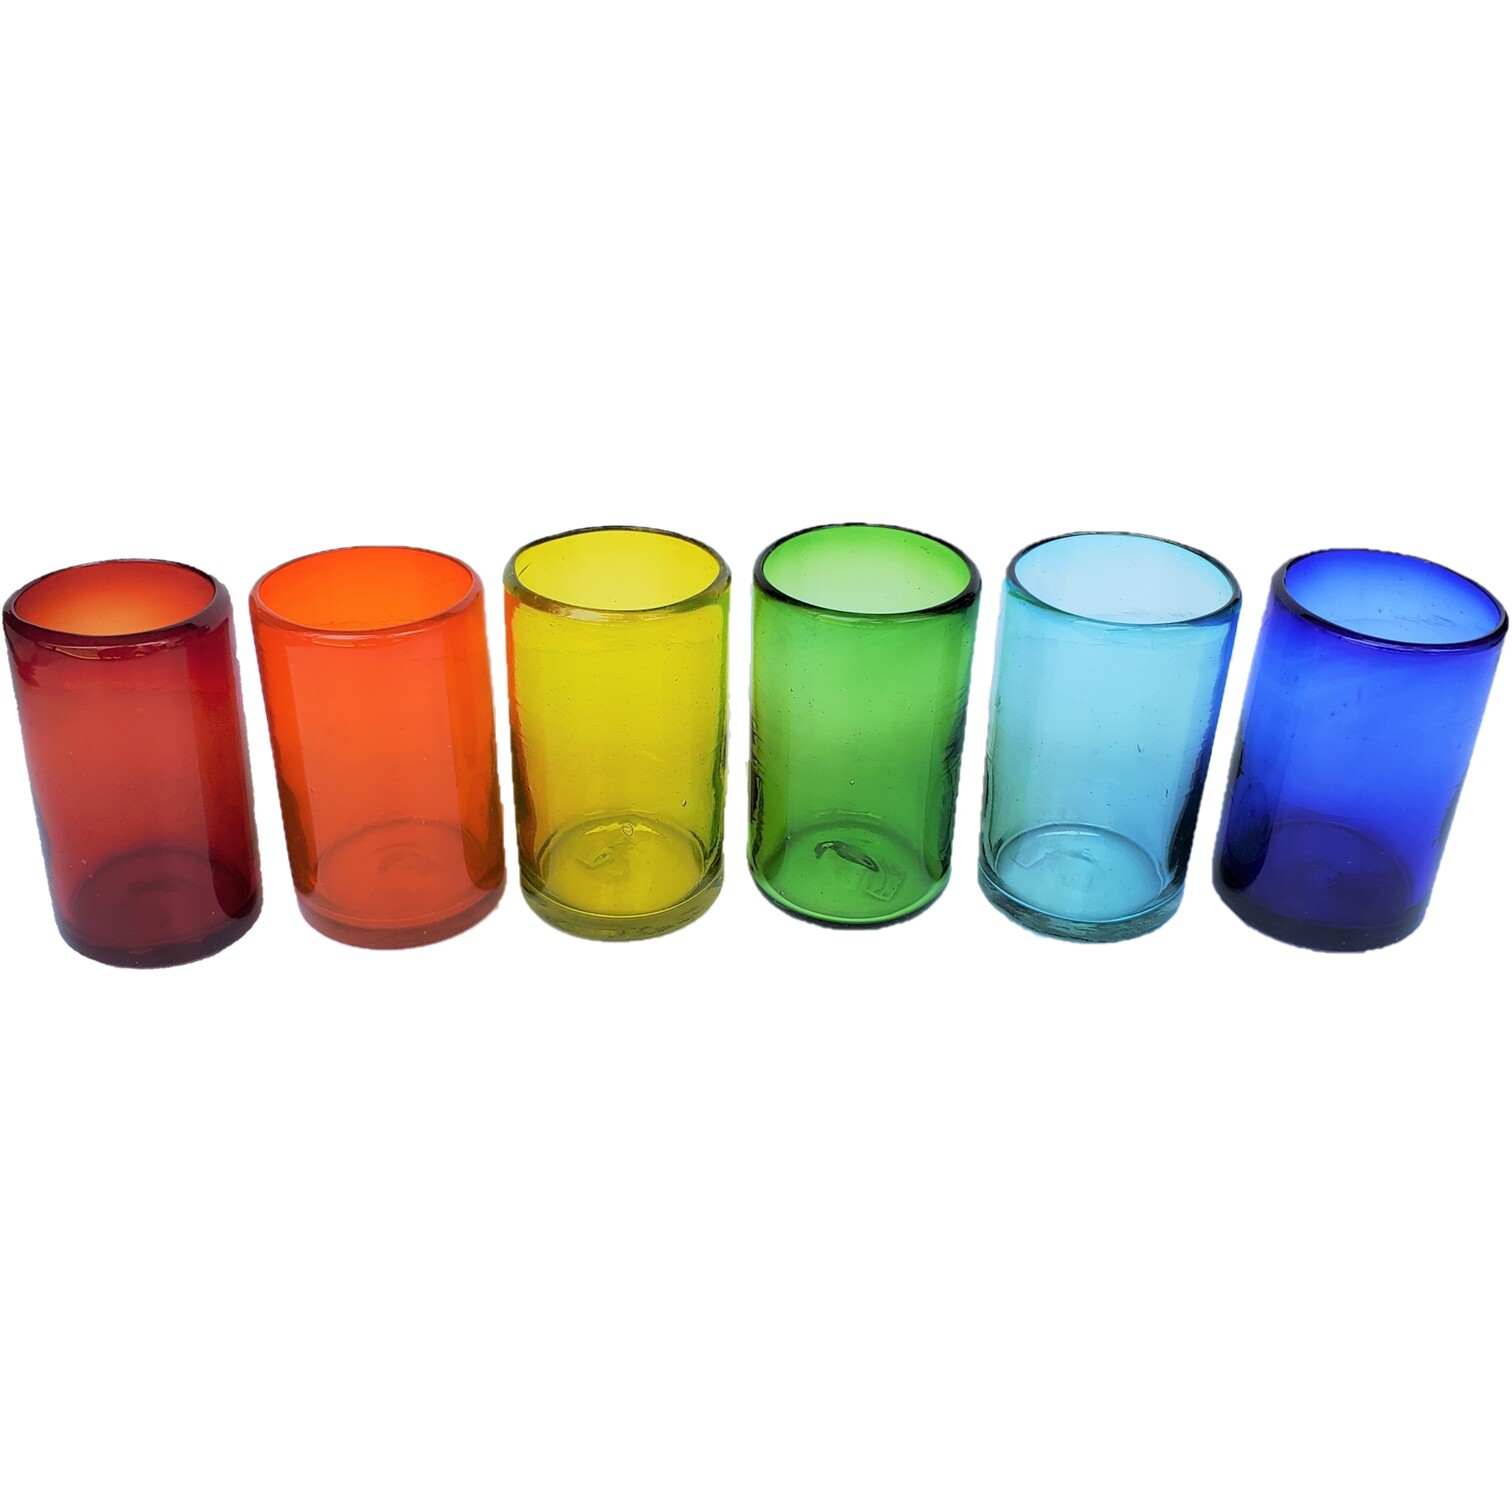  / Rainbow Colored drinking glasses (set of 6)